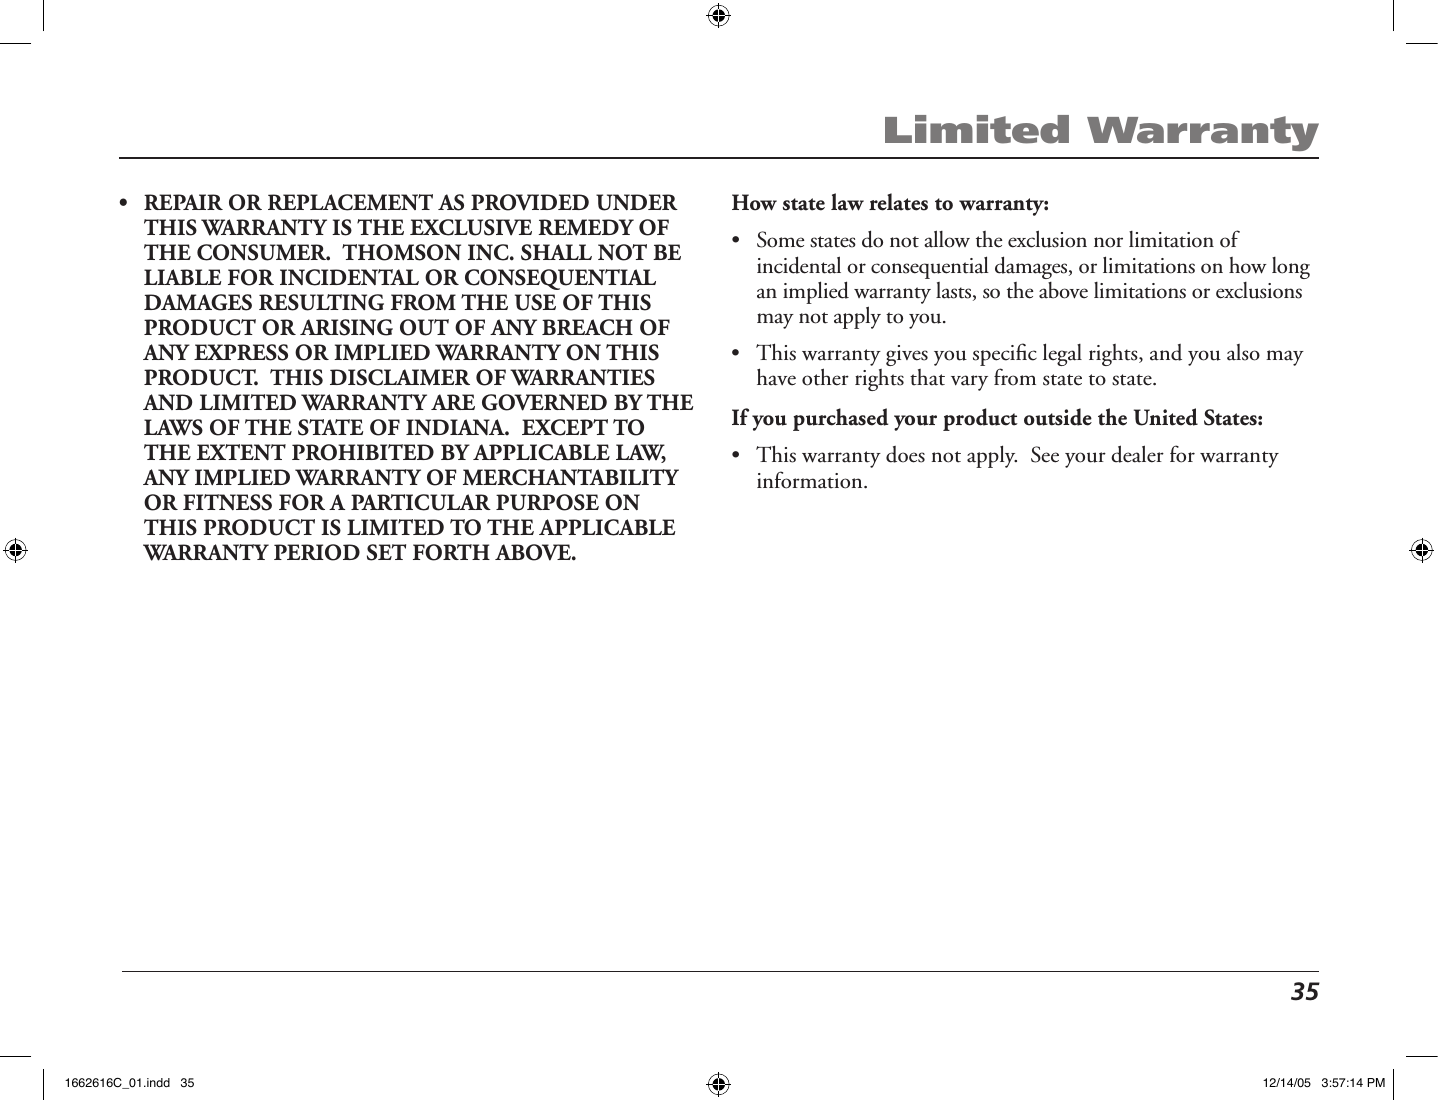  35Limited Warranty•   REPAIR OR REPLACEMENT AS PROVIDED UNDER THIS WARRANTY IS THE EXCLUSIVE REMEDY OF THE CONSUMER.  THOMSON INC. SHALL NOT BE LIABLE FOR INCIDENTAL OR CONSEQUENTIAL DAMAGES RESULTING FROM THE USE OF THIS PRODUCT OR ARISING OUT OF ANY BREACH OF ANY EXPRESS OR IMPLIED WARRANTY ON THIS PRODUCT.  THIS DISCLAIMER OF WARRANTIES AND LIMITED WARRANTY ARE GOVERNED BY THE LAWS OF THE STATE OF INDIANA.  EXCEPT TO THE EXTENT PROHIBITED BY APPLICABLE LAW, ANY IMPLIED WARRANTY OF MERCHANTABILITY OR FITNESS FOR A PARTICULAR PURPOSE ON THIS PRODUCT IS LIMITED TO THE APPLICABLE WARRANTY PERIOD SET FORTH ABOVE. How state law relates to warranty:•   Some states do not allow the exclusion nor limitation of incidental or consequential damages, or limitations on how long an implied warranty lasts, so the above limitations or exclusions may not apply to you.•   This warranty gives you speciﬁc legal rights, and you also may have other rights that vary from state to state.If you purchased your product outside the United States:•  This warranty does not apply.  See your dealer for warranty information.1662616C_01.indd   35 12/14/05   3:57:14 PM